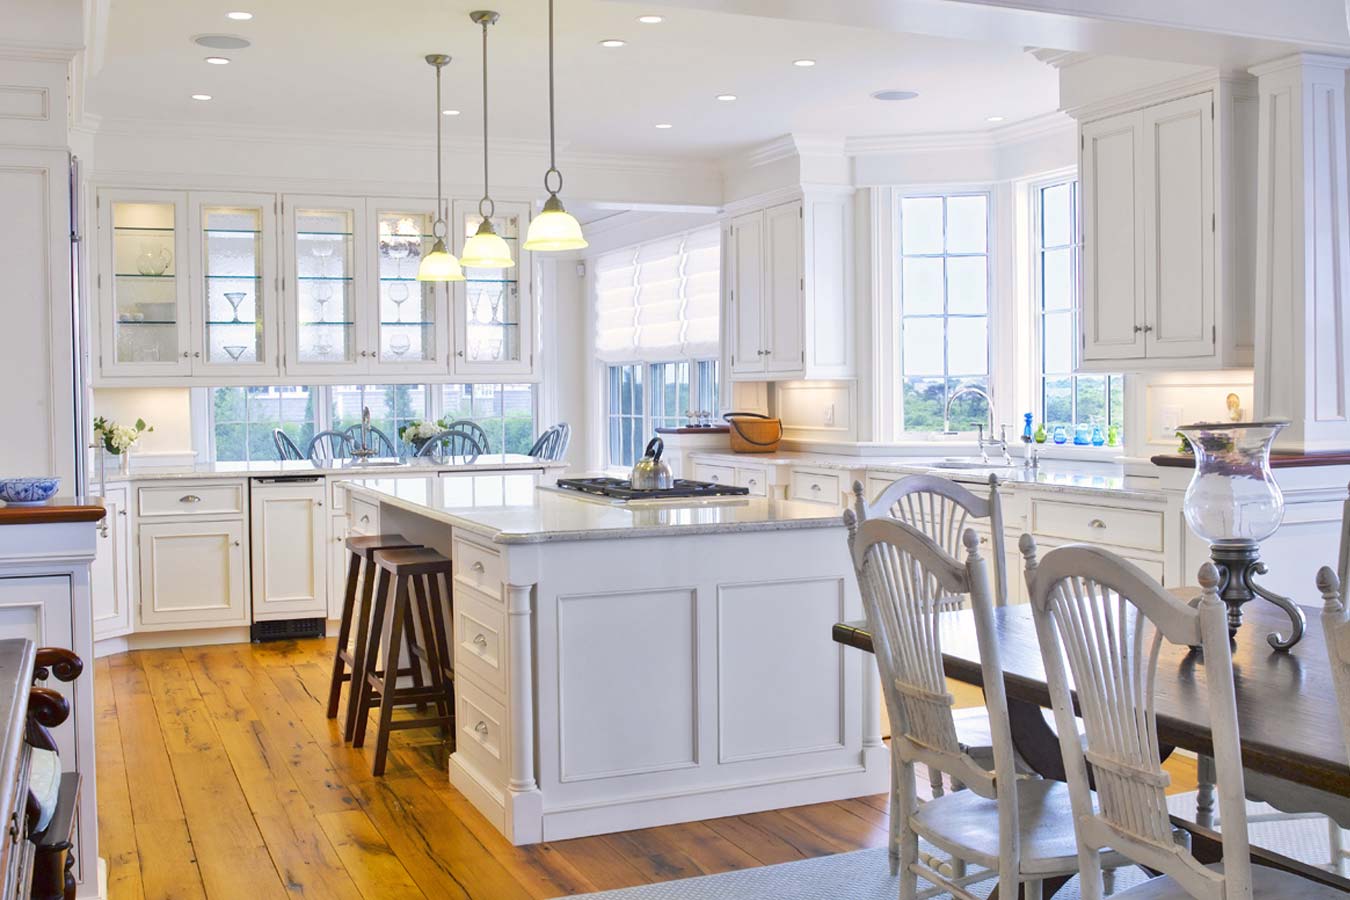 White Kitchen Assembling Winsome White Kitchen Ideas Furniture Assembling Showing Dining Room Table Neighbor Upon Island Kitchen White Kitchen Ideas Ideal For Traditional And Modern Designs